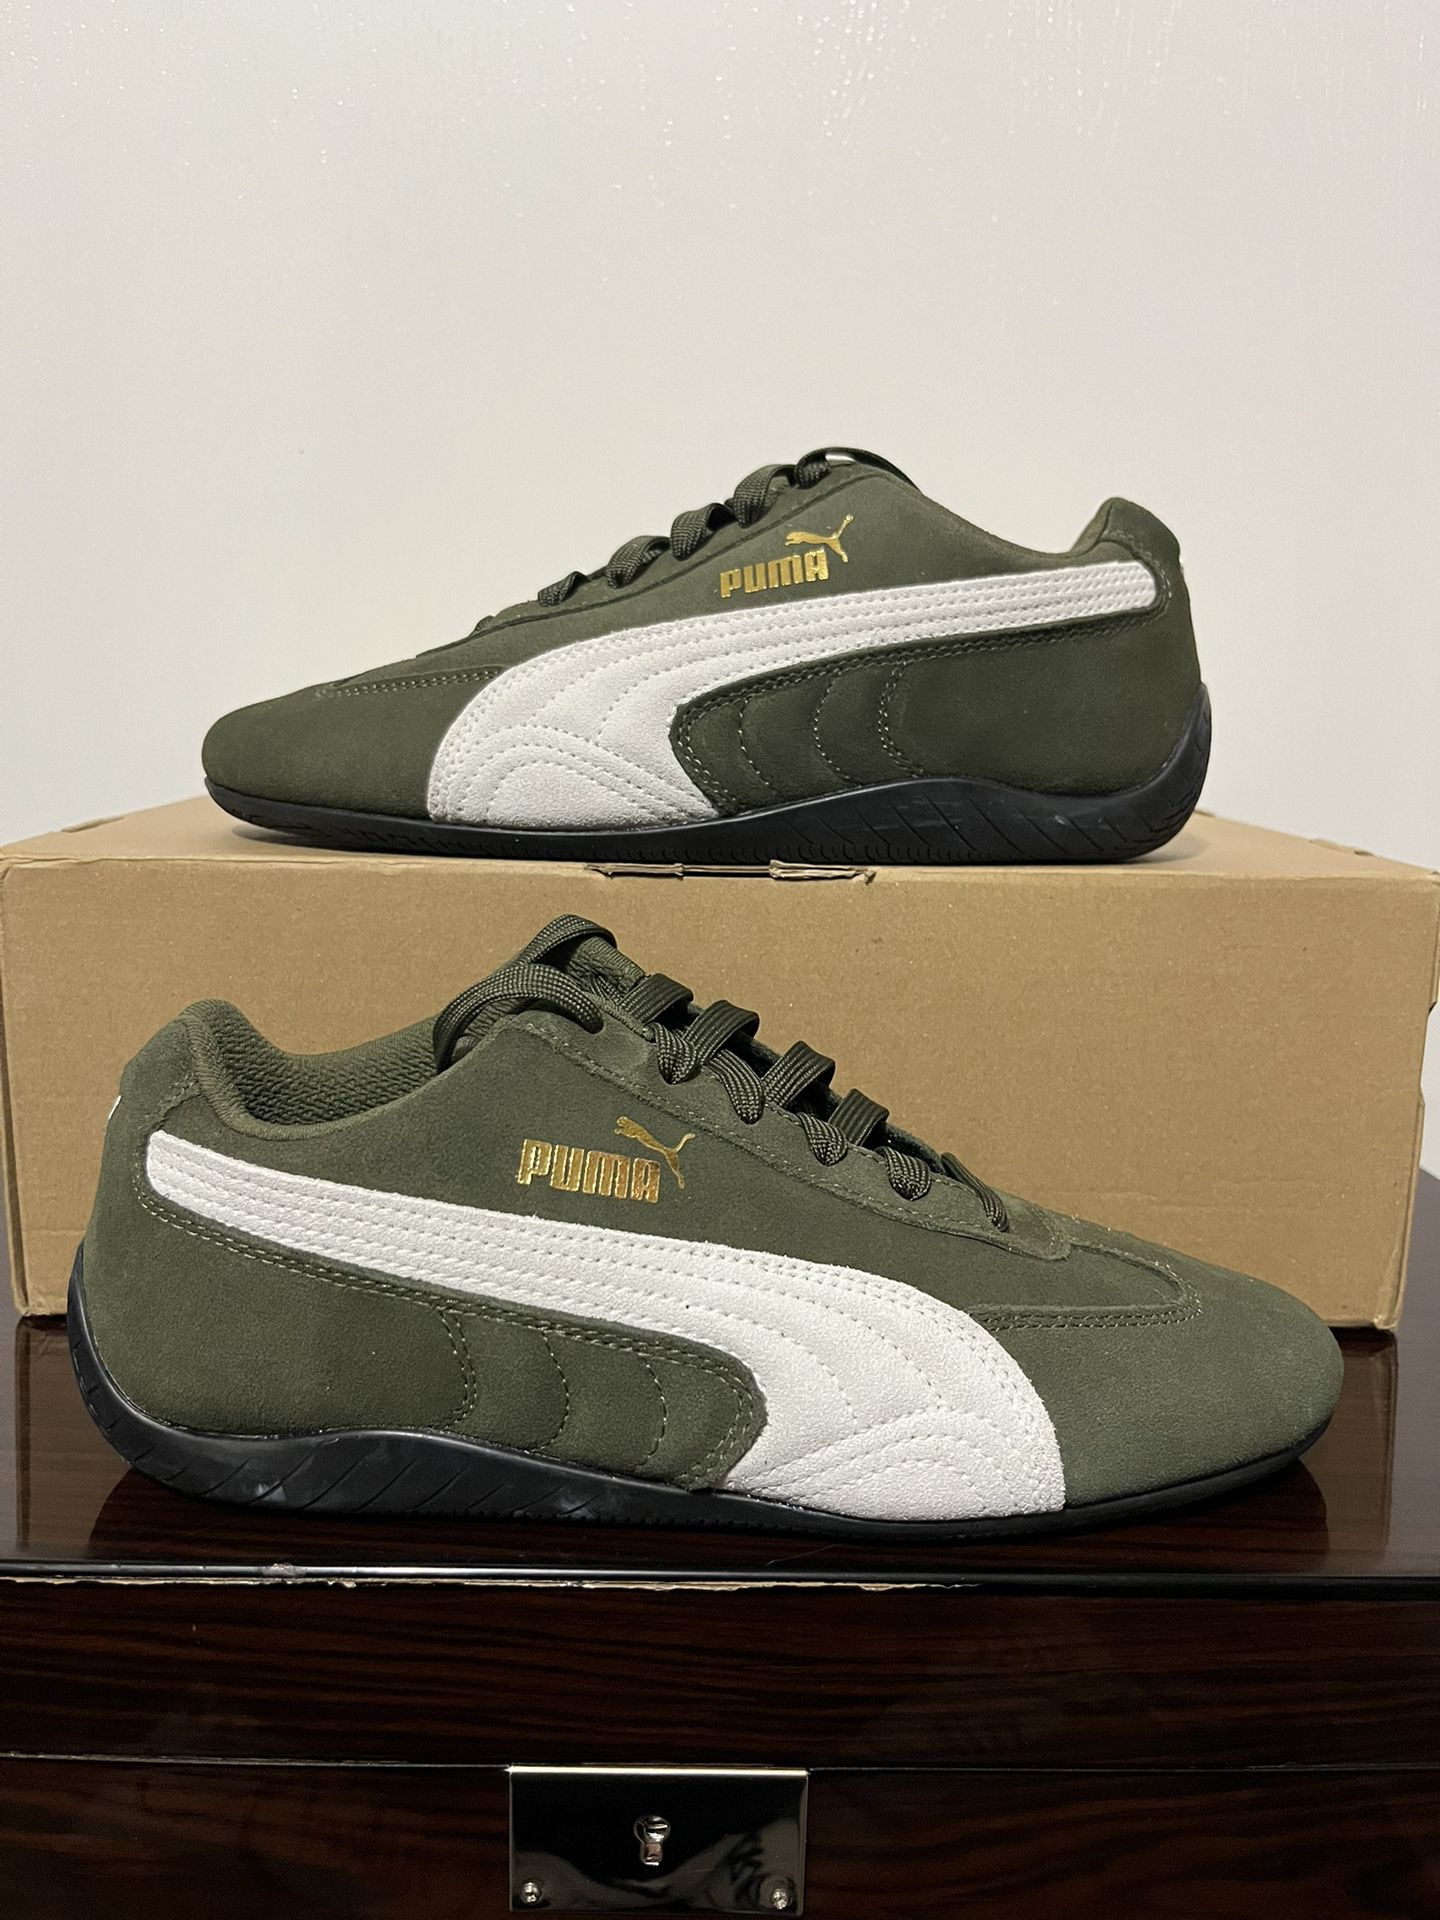 Puma Speedcat OG Sparco Forest Night Puma White 307171-04 Green Size 7 Or 11